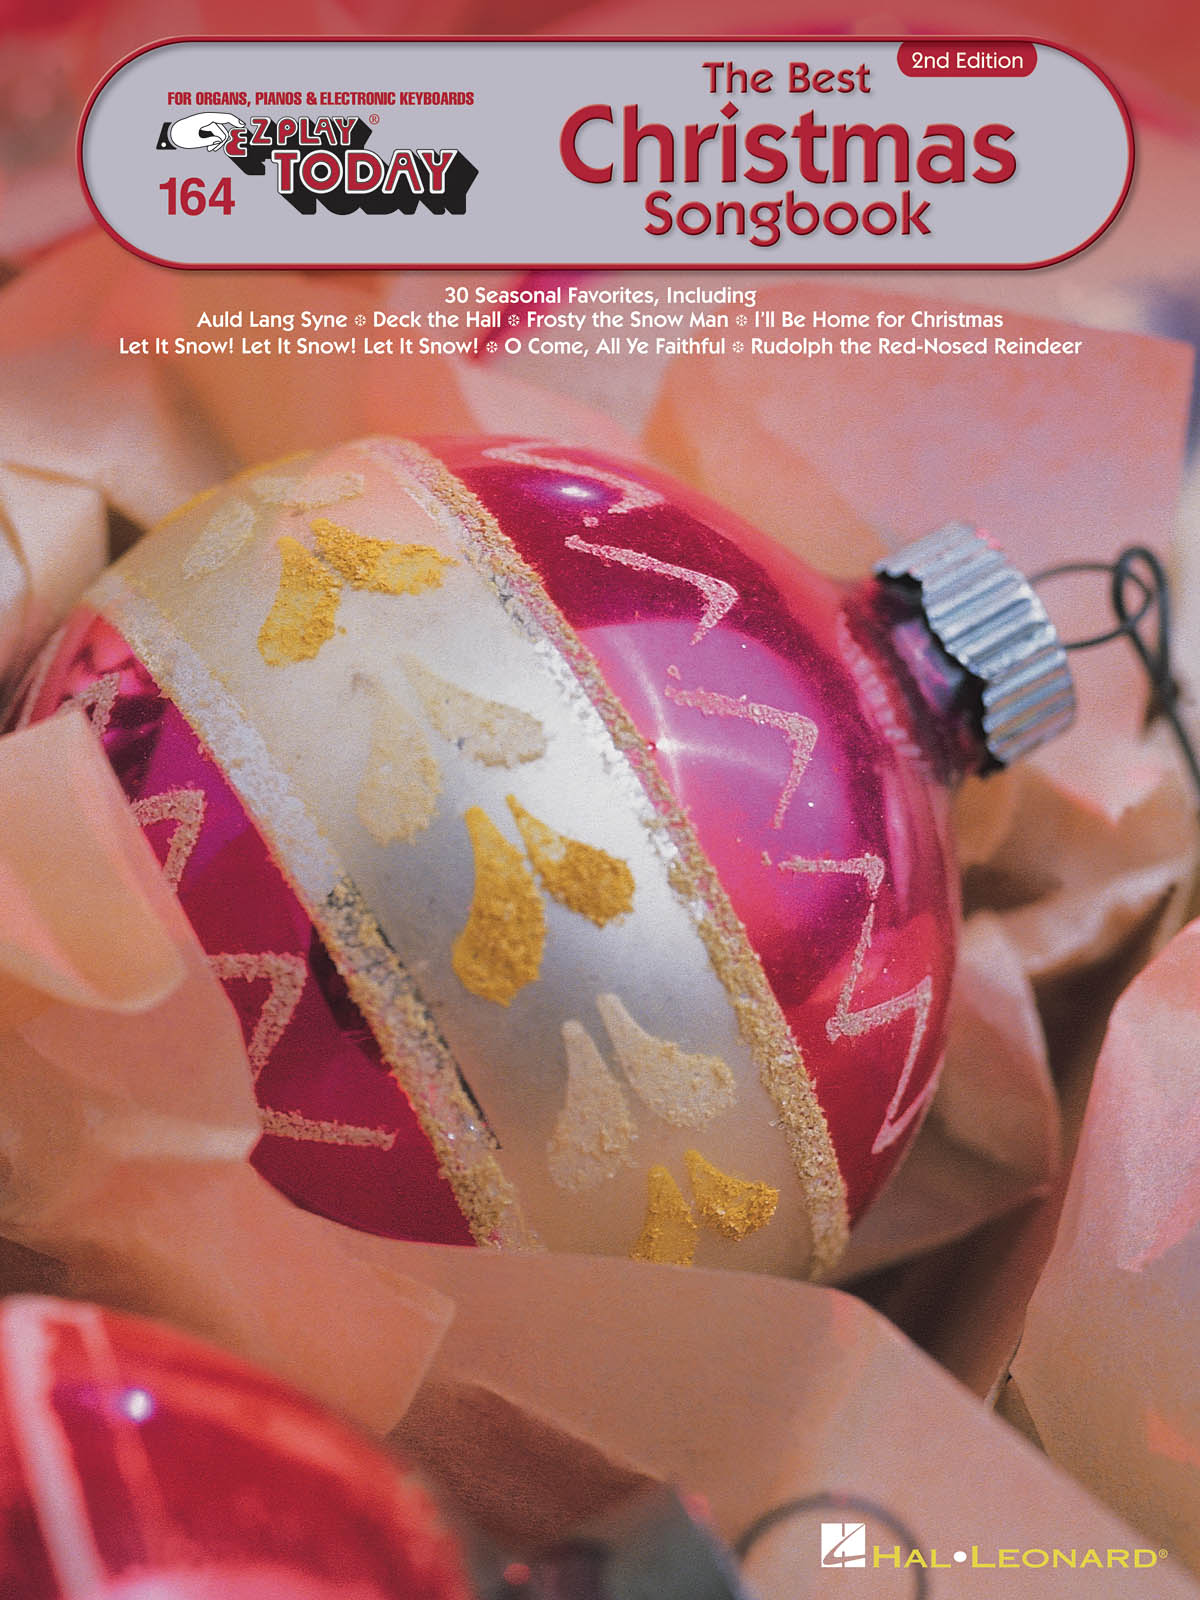 The Best Christmas Songbook(E-Z Play Today Volume 164)